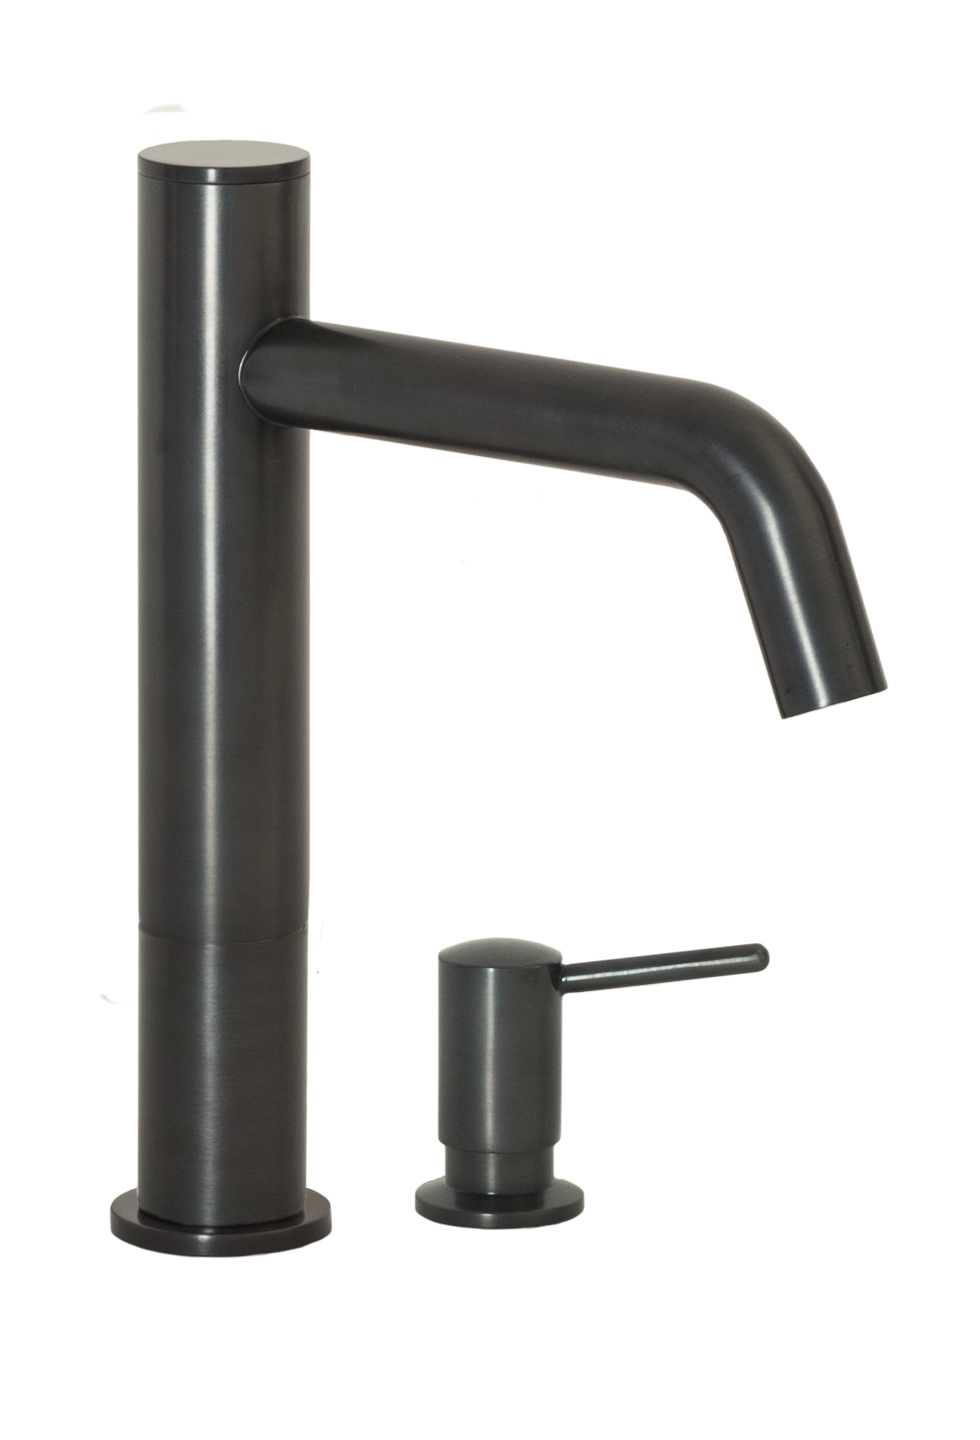 FA-3283S Automatic Faucet with 8” Spout Reach, 3” Riser and Manual Soap Dispenser In Oil Rubbed Bronze